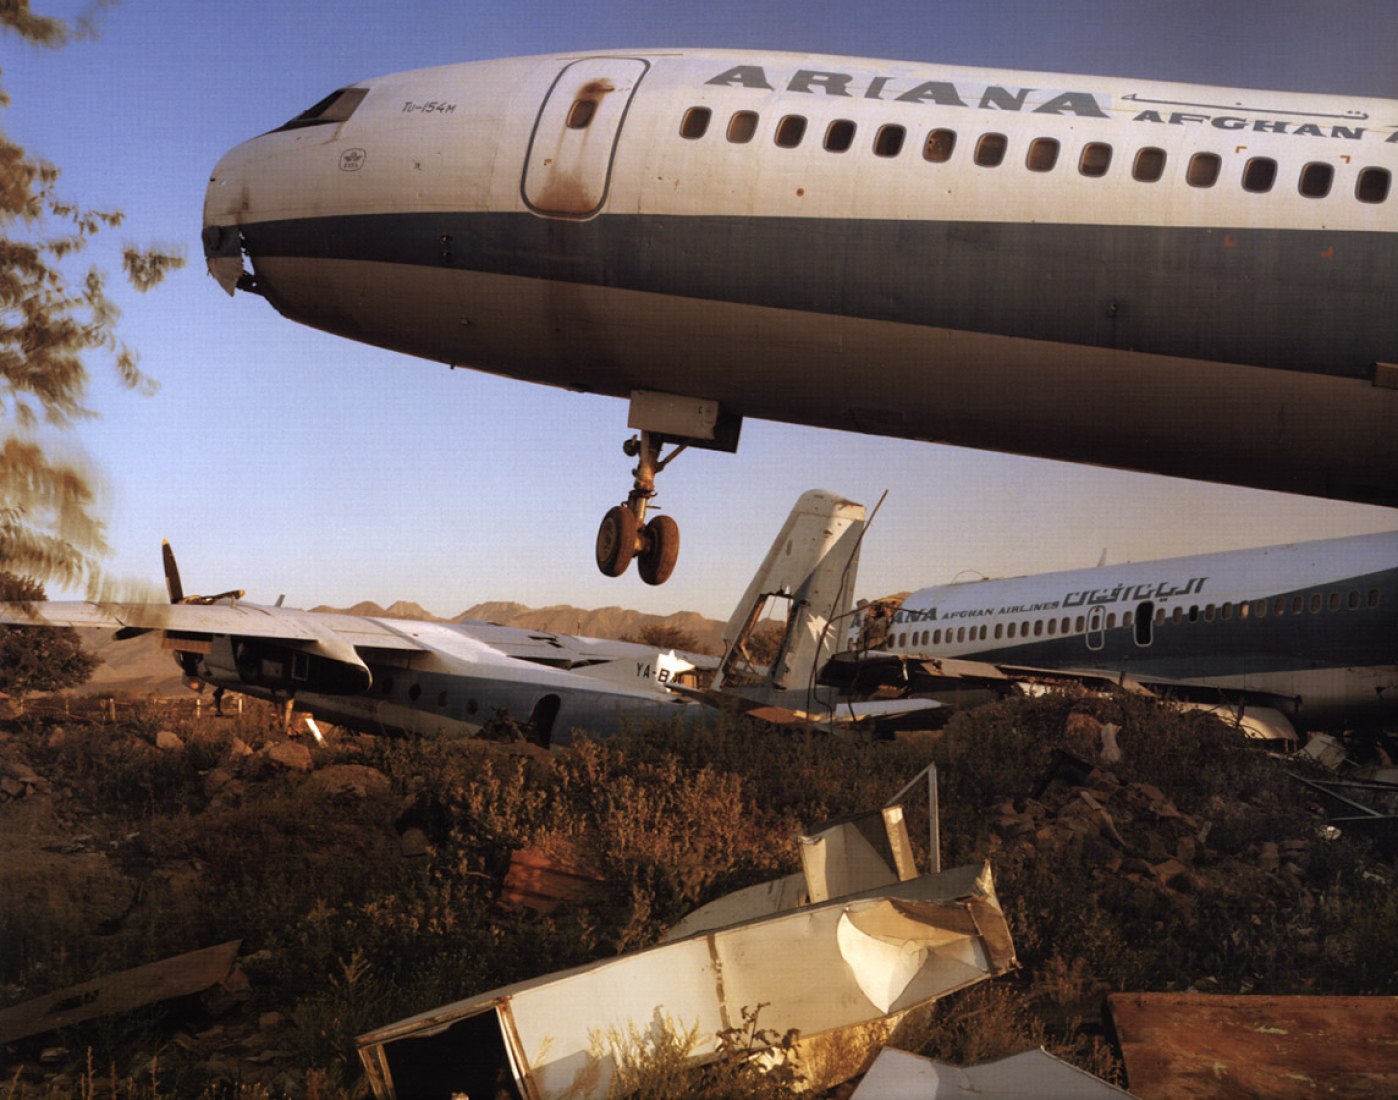 Wrecked Ariana Afghan Airlines jets at Kabul Airport pushed into a mined area at the edge of the apron. By Simon Norfolk